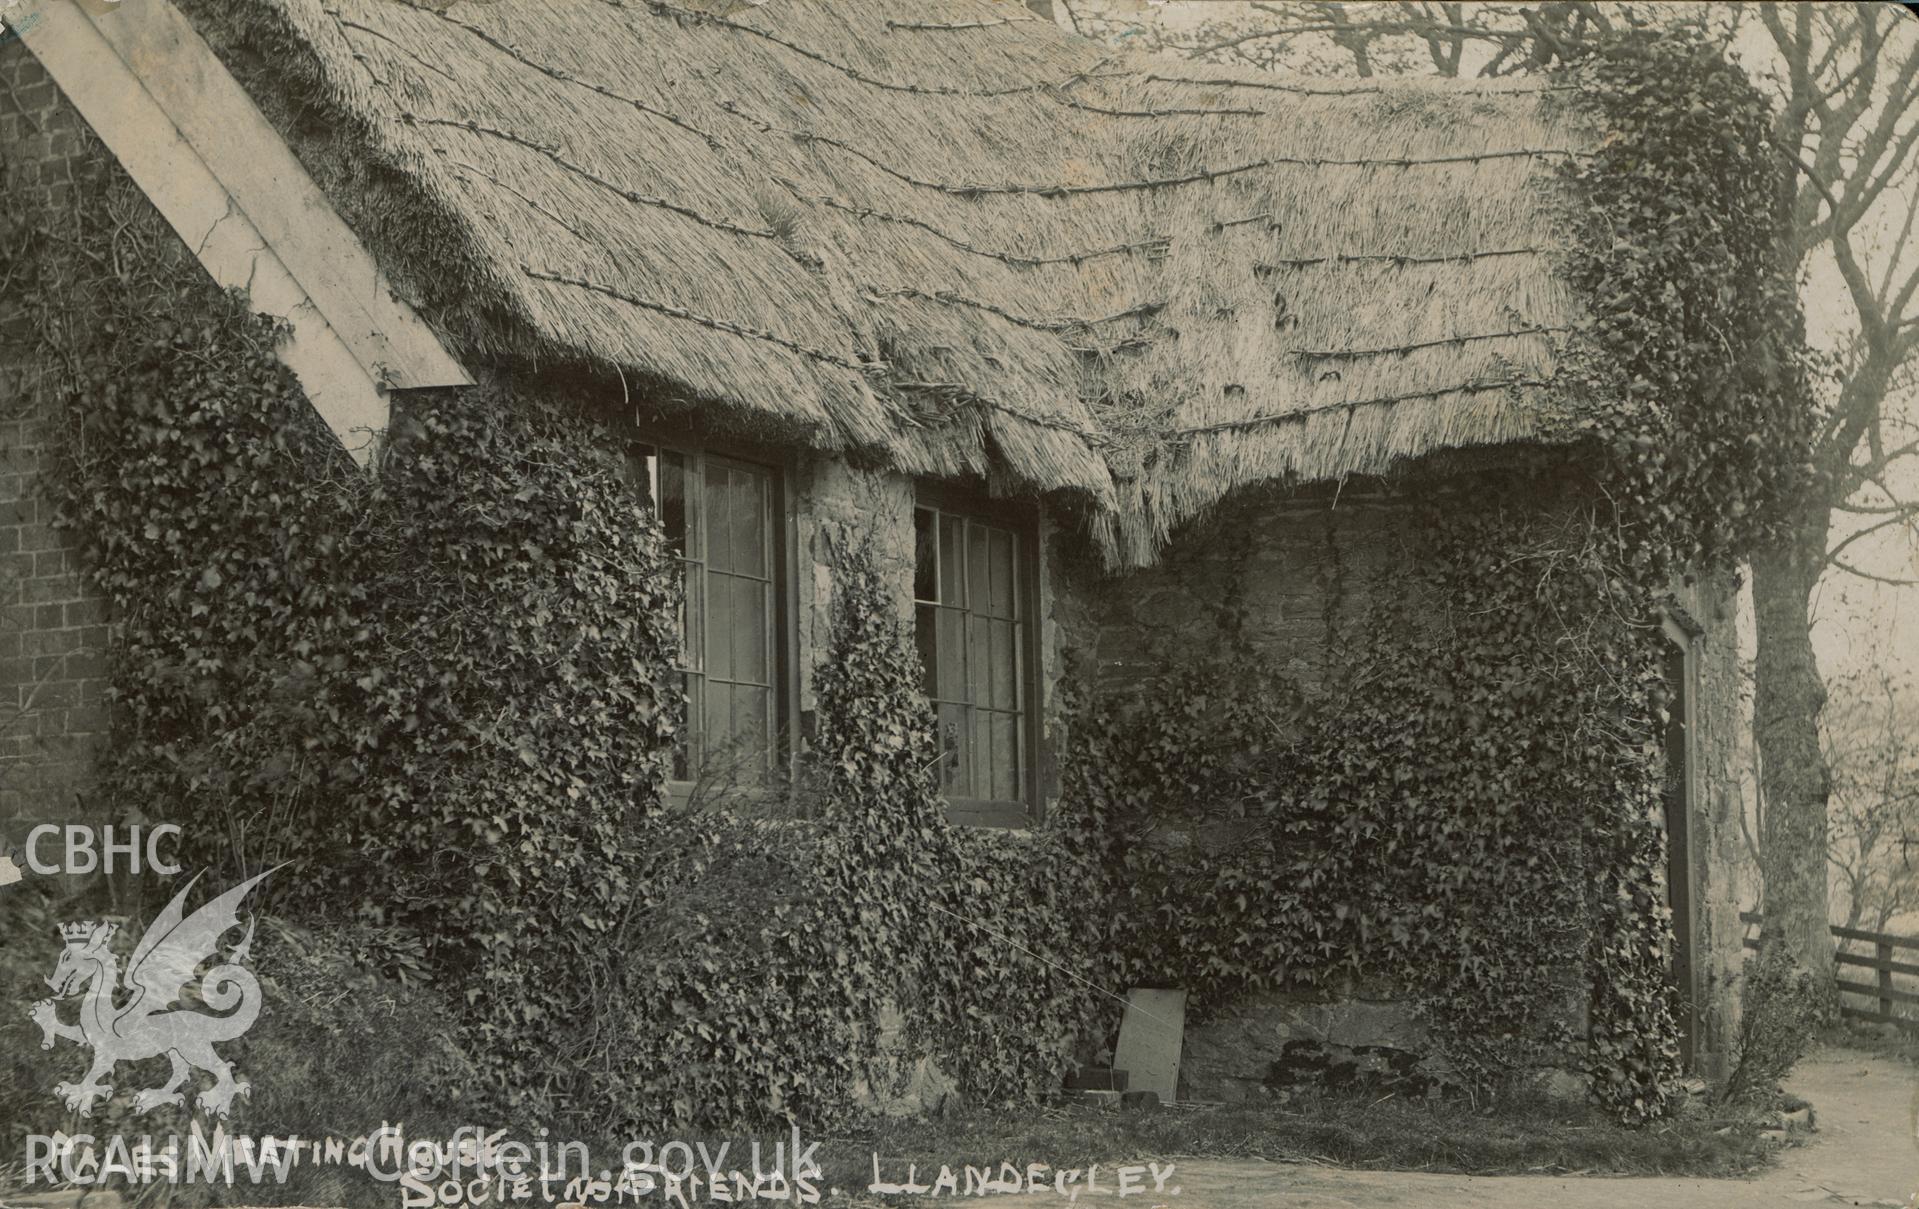 Digital copy of monochrome postcard showing exterior view of The Pales Friends' Meeting House, Llandegley, Penybont. Loaned for copying by Thomas Lloyd.